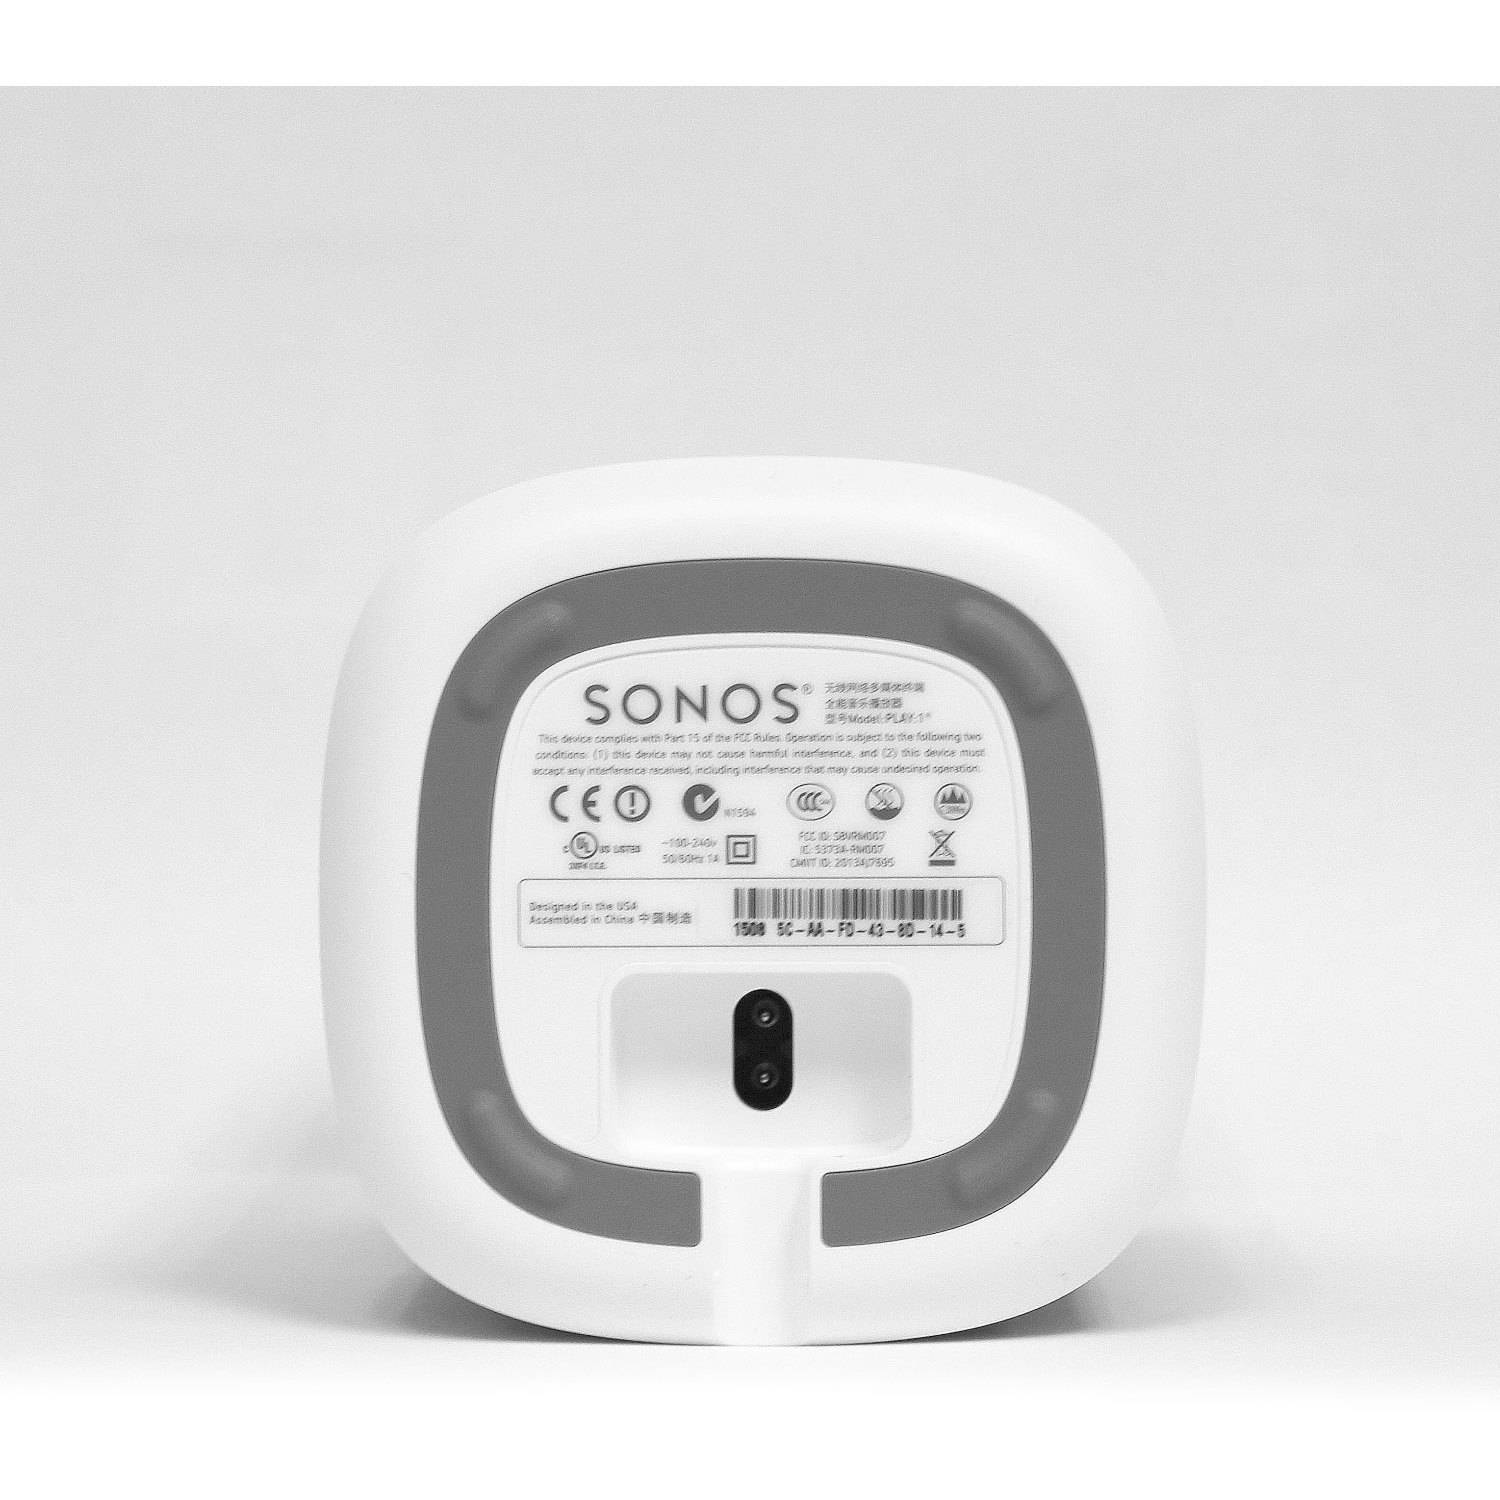 Sonos PLAY:1 Compact Smart Speaker for Streaming Music, White - image 4 of 5